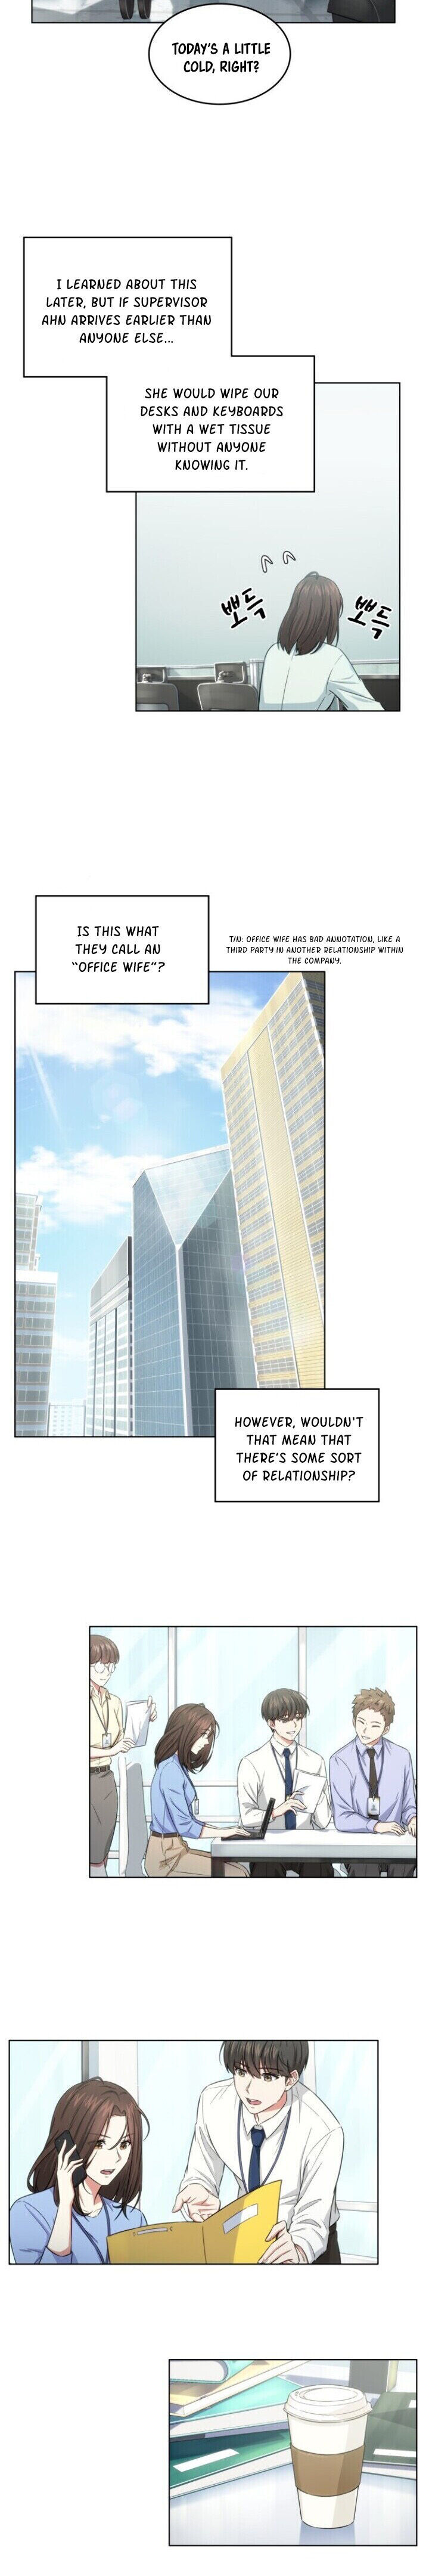 Our Office Story - Chapter 10 Page 8